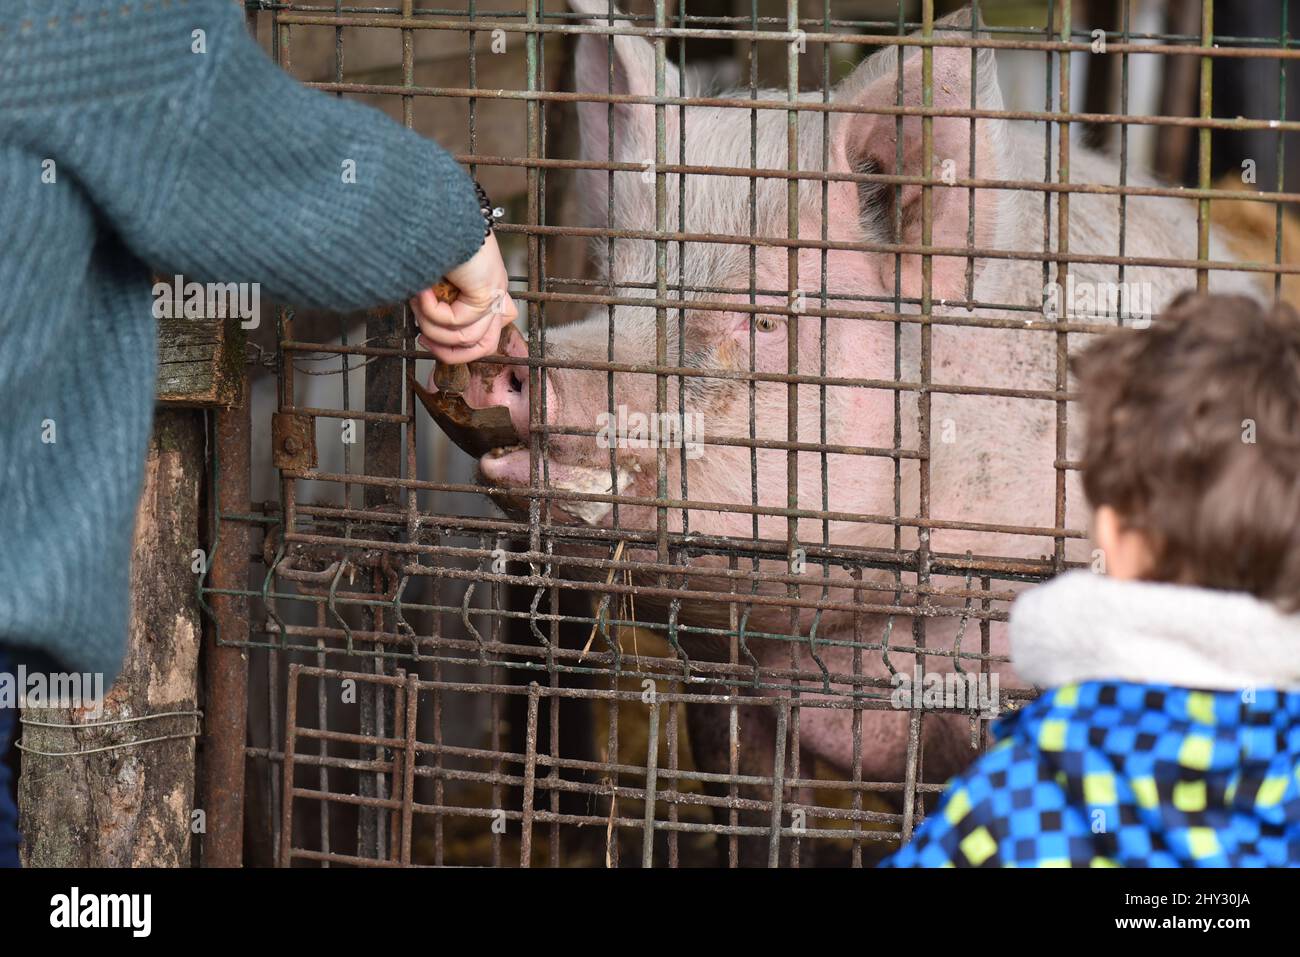 Mother feeding huge pink pig through a wire fence in a farm while his child is watching. Pig eating cereal from the hands of a woman. Stock Photo